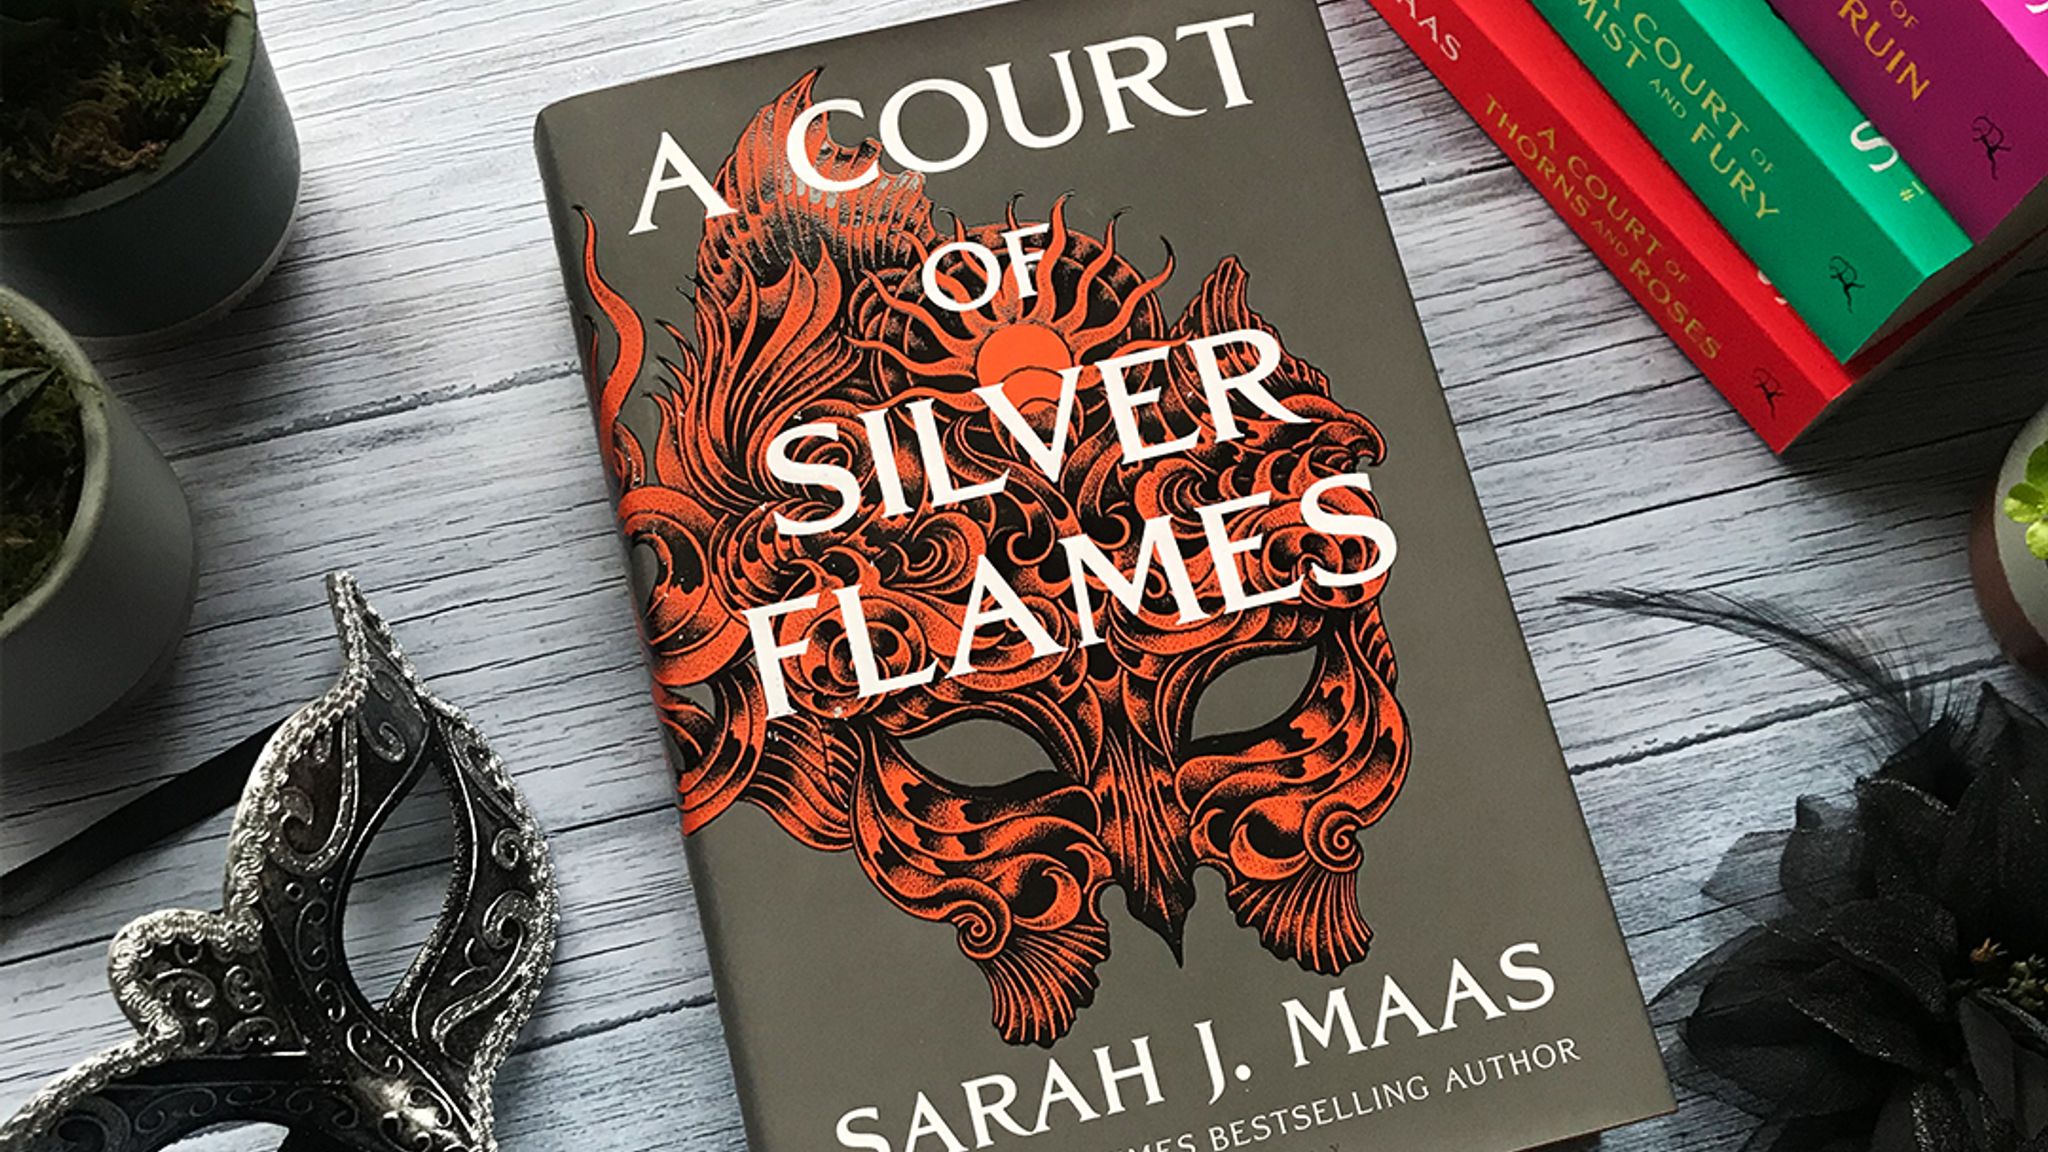 A Court of Silver Flames by Sarah J Maas has proved popular, Bloomsbury sai...